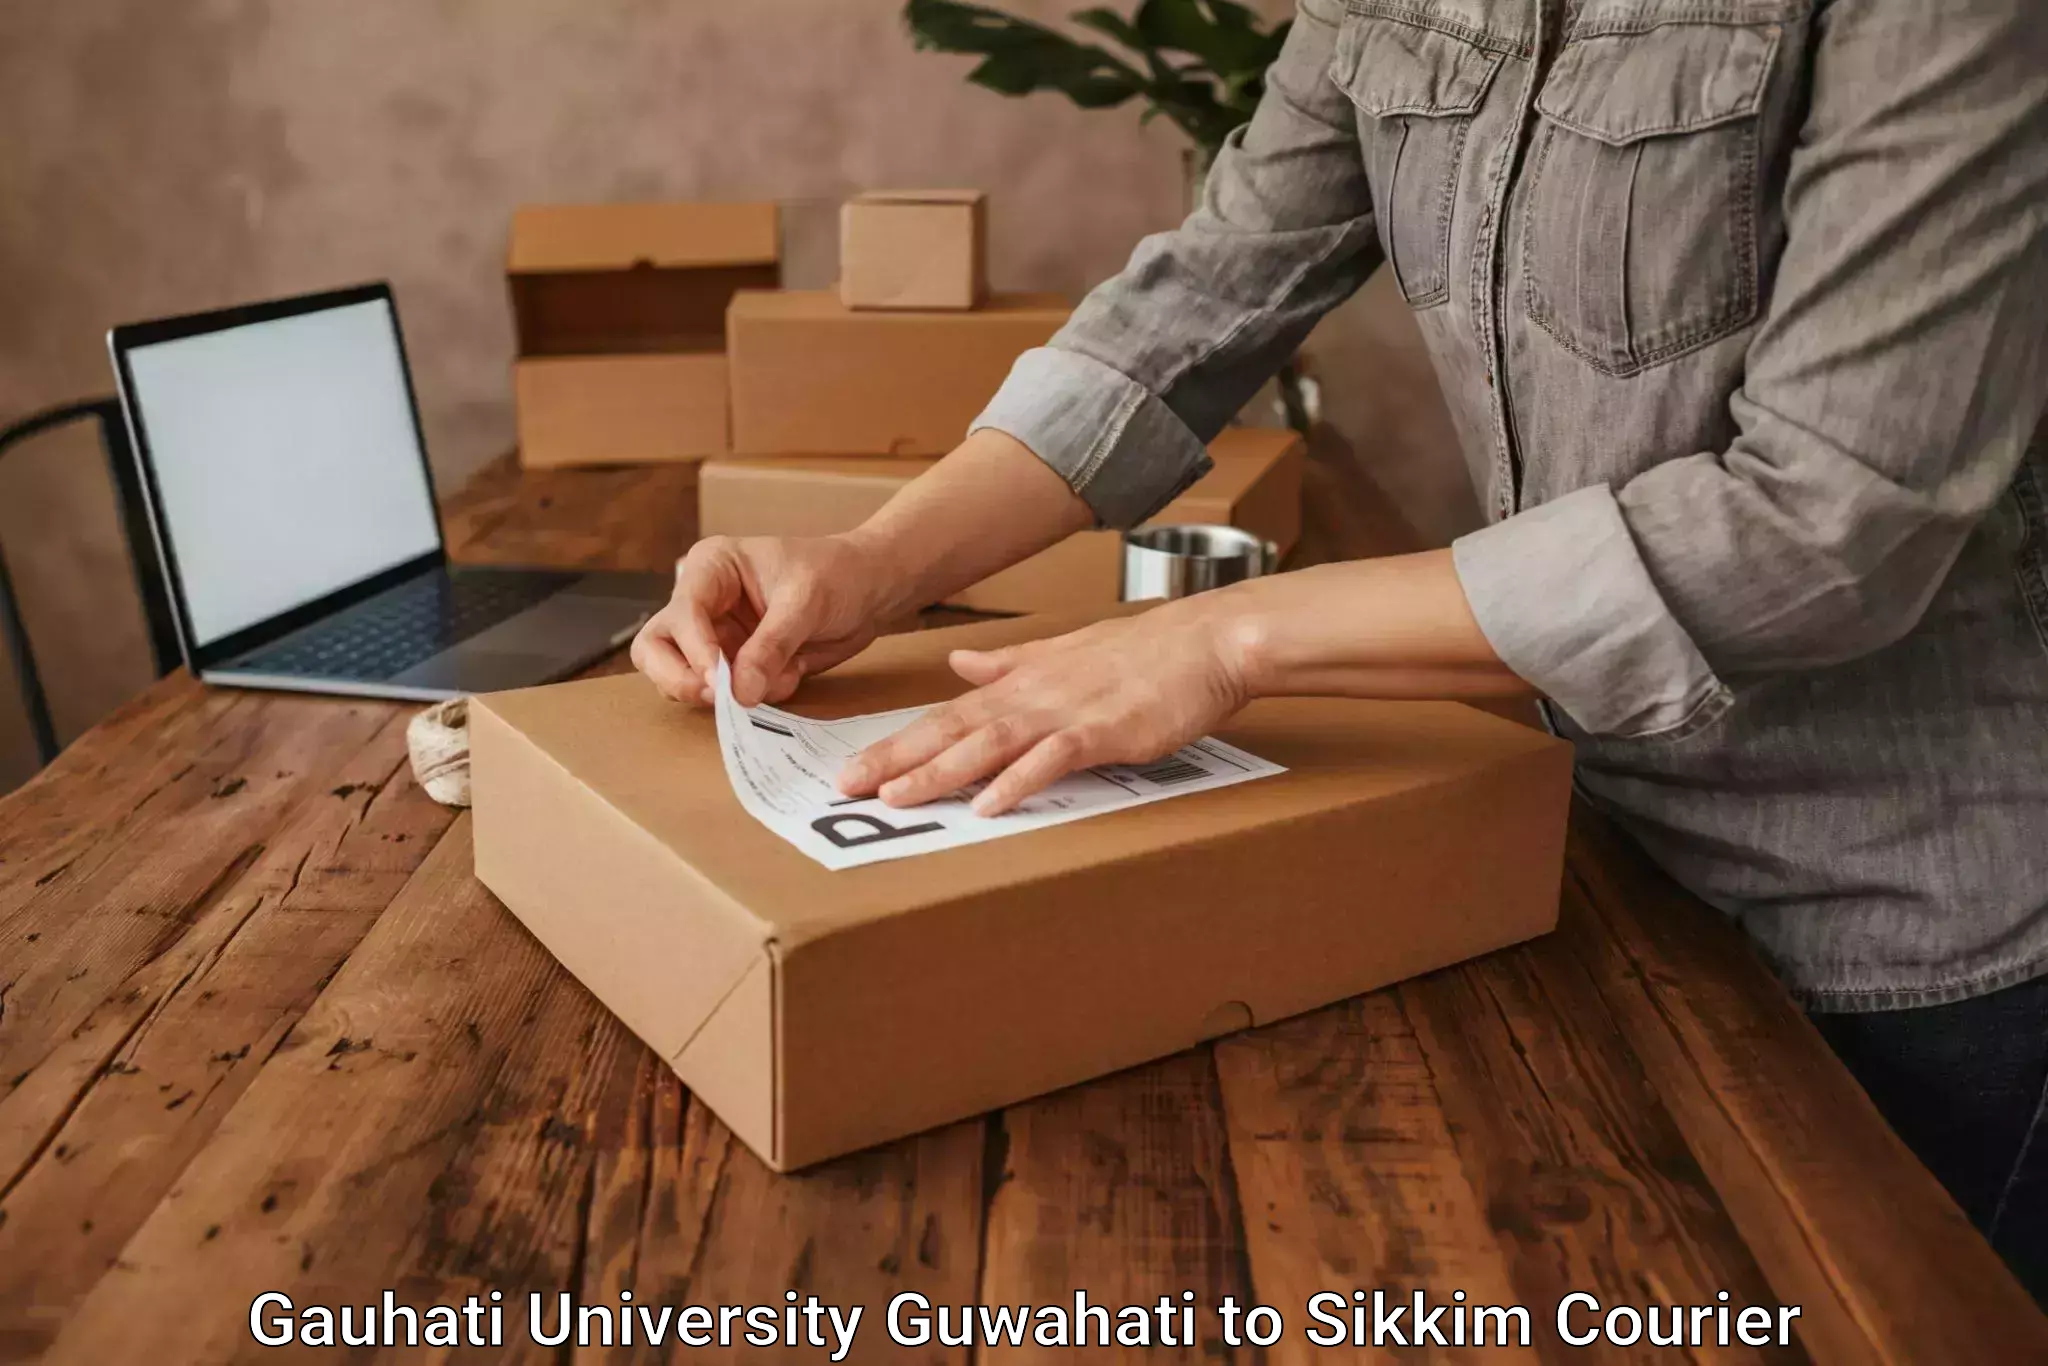 Reliable courier service Gauhati University Guwahati to South Sikkim